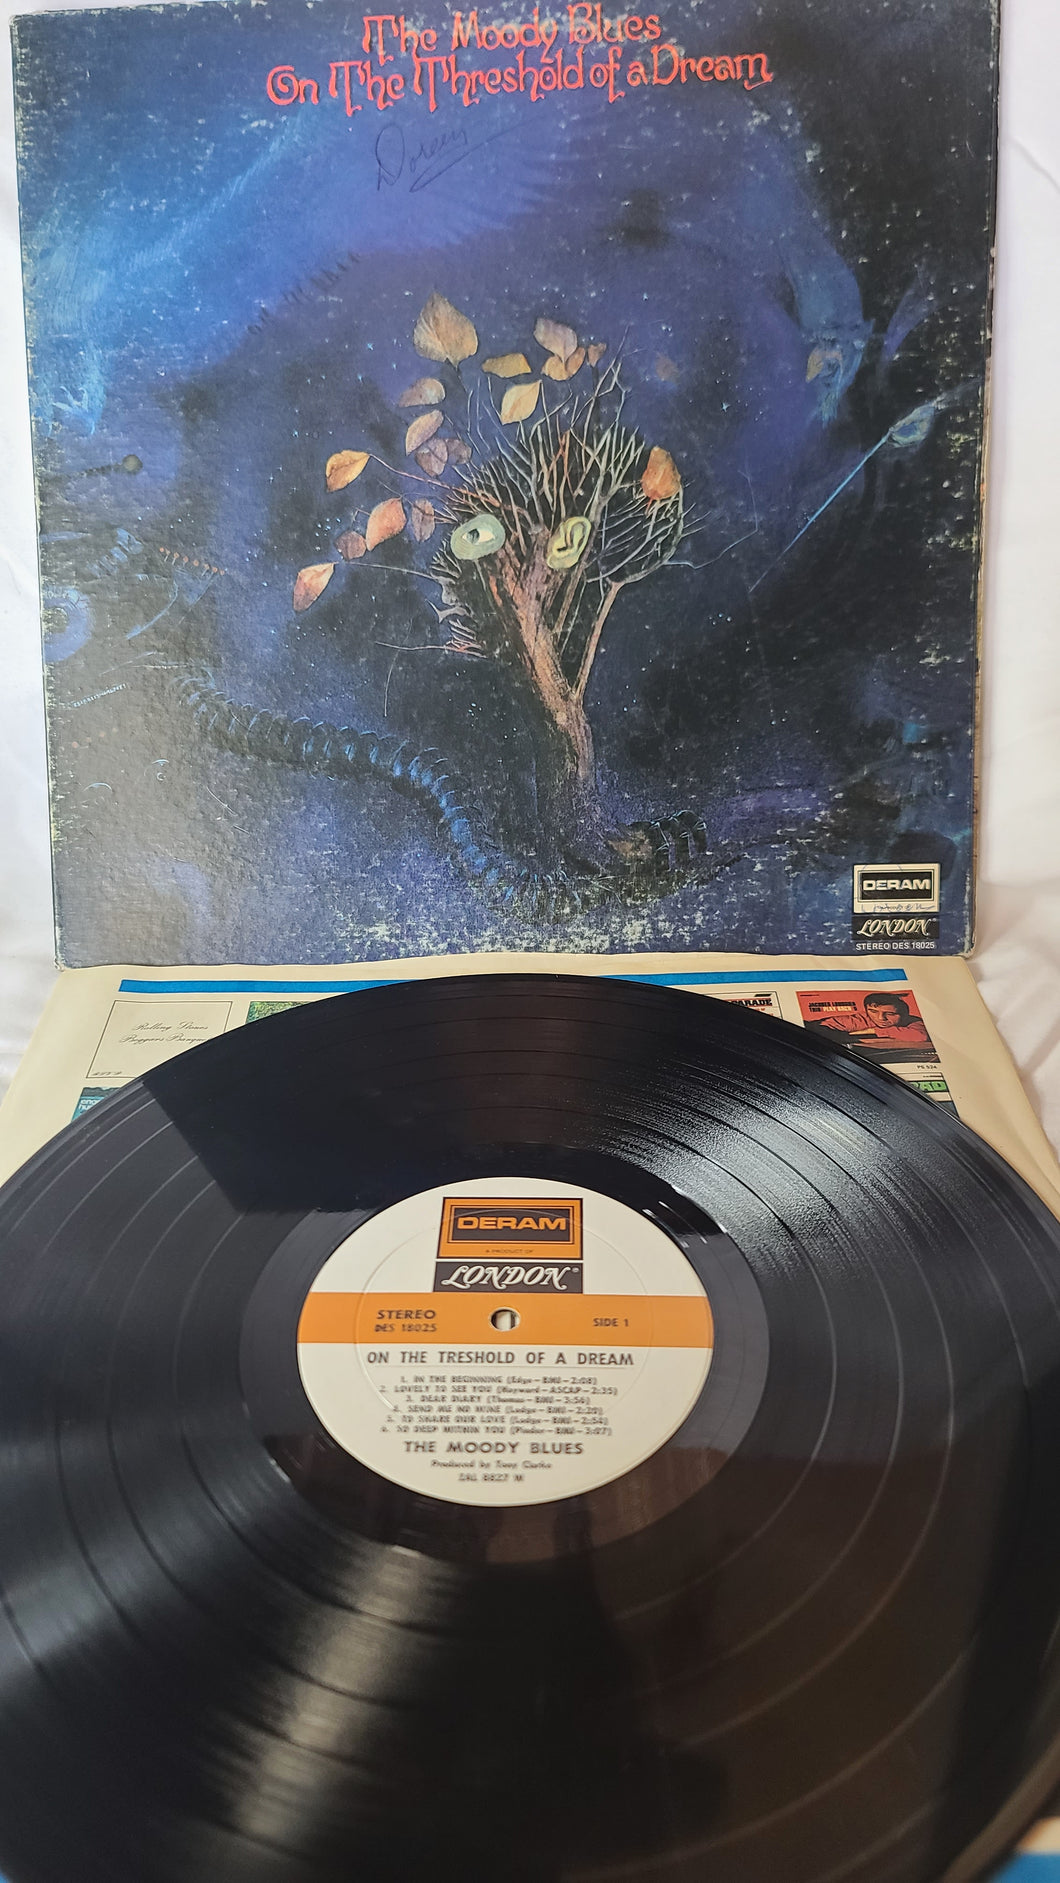 The Moody Blues On The Threshold of a Dream 1969 Vinyl Record